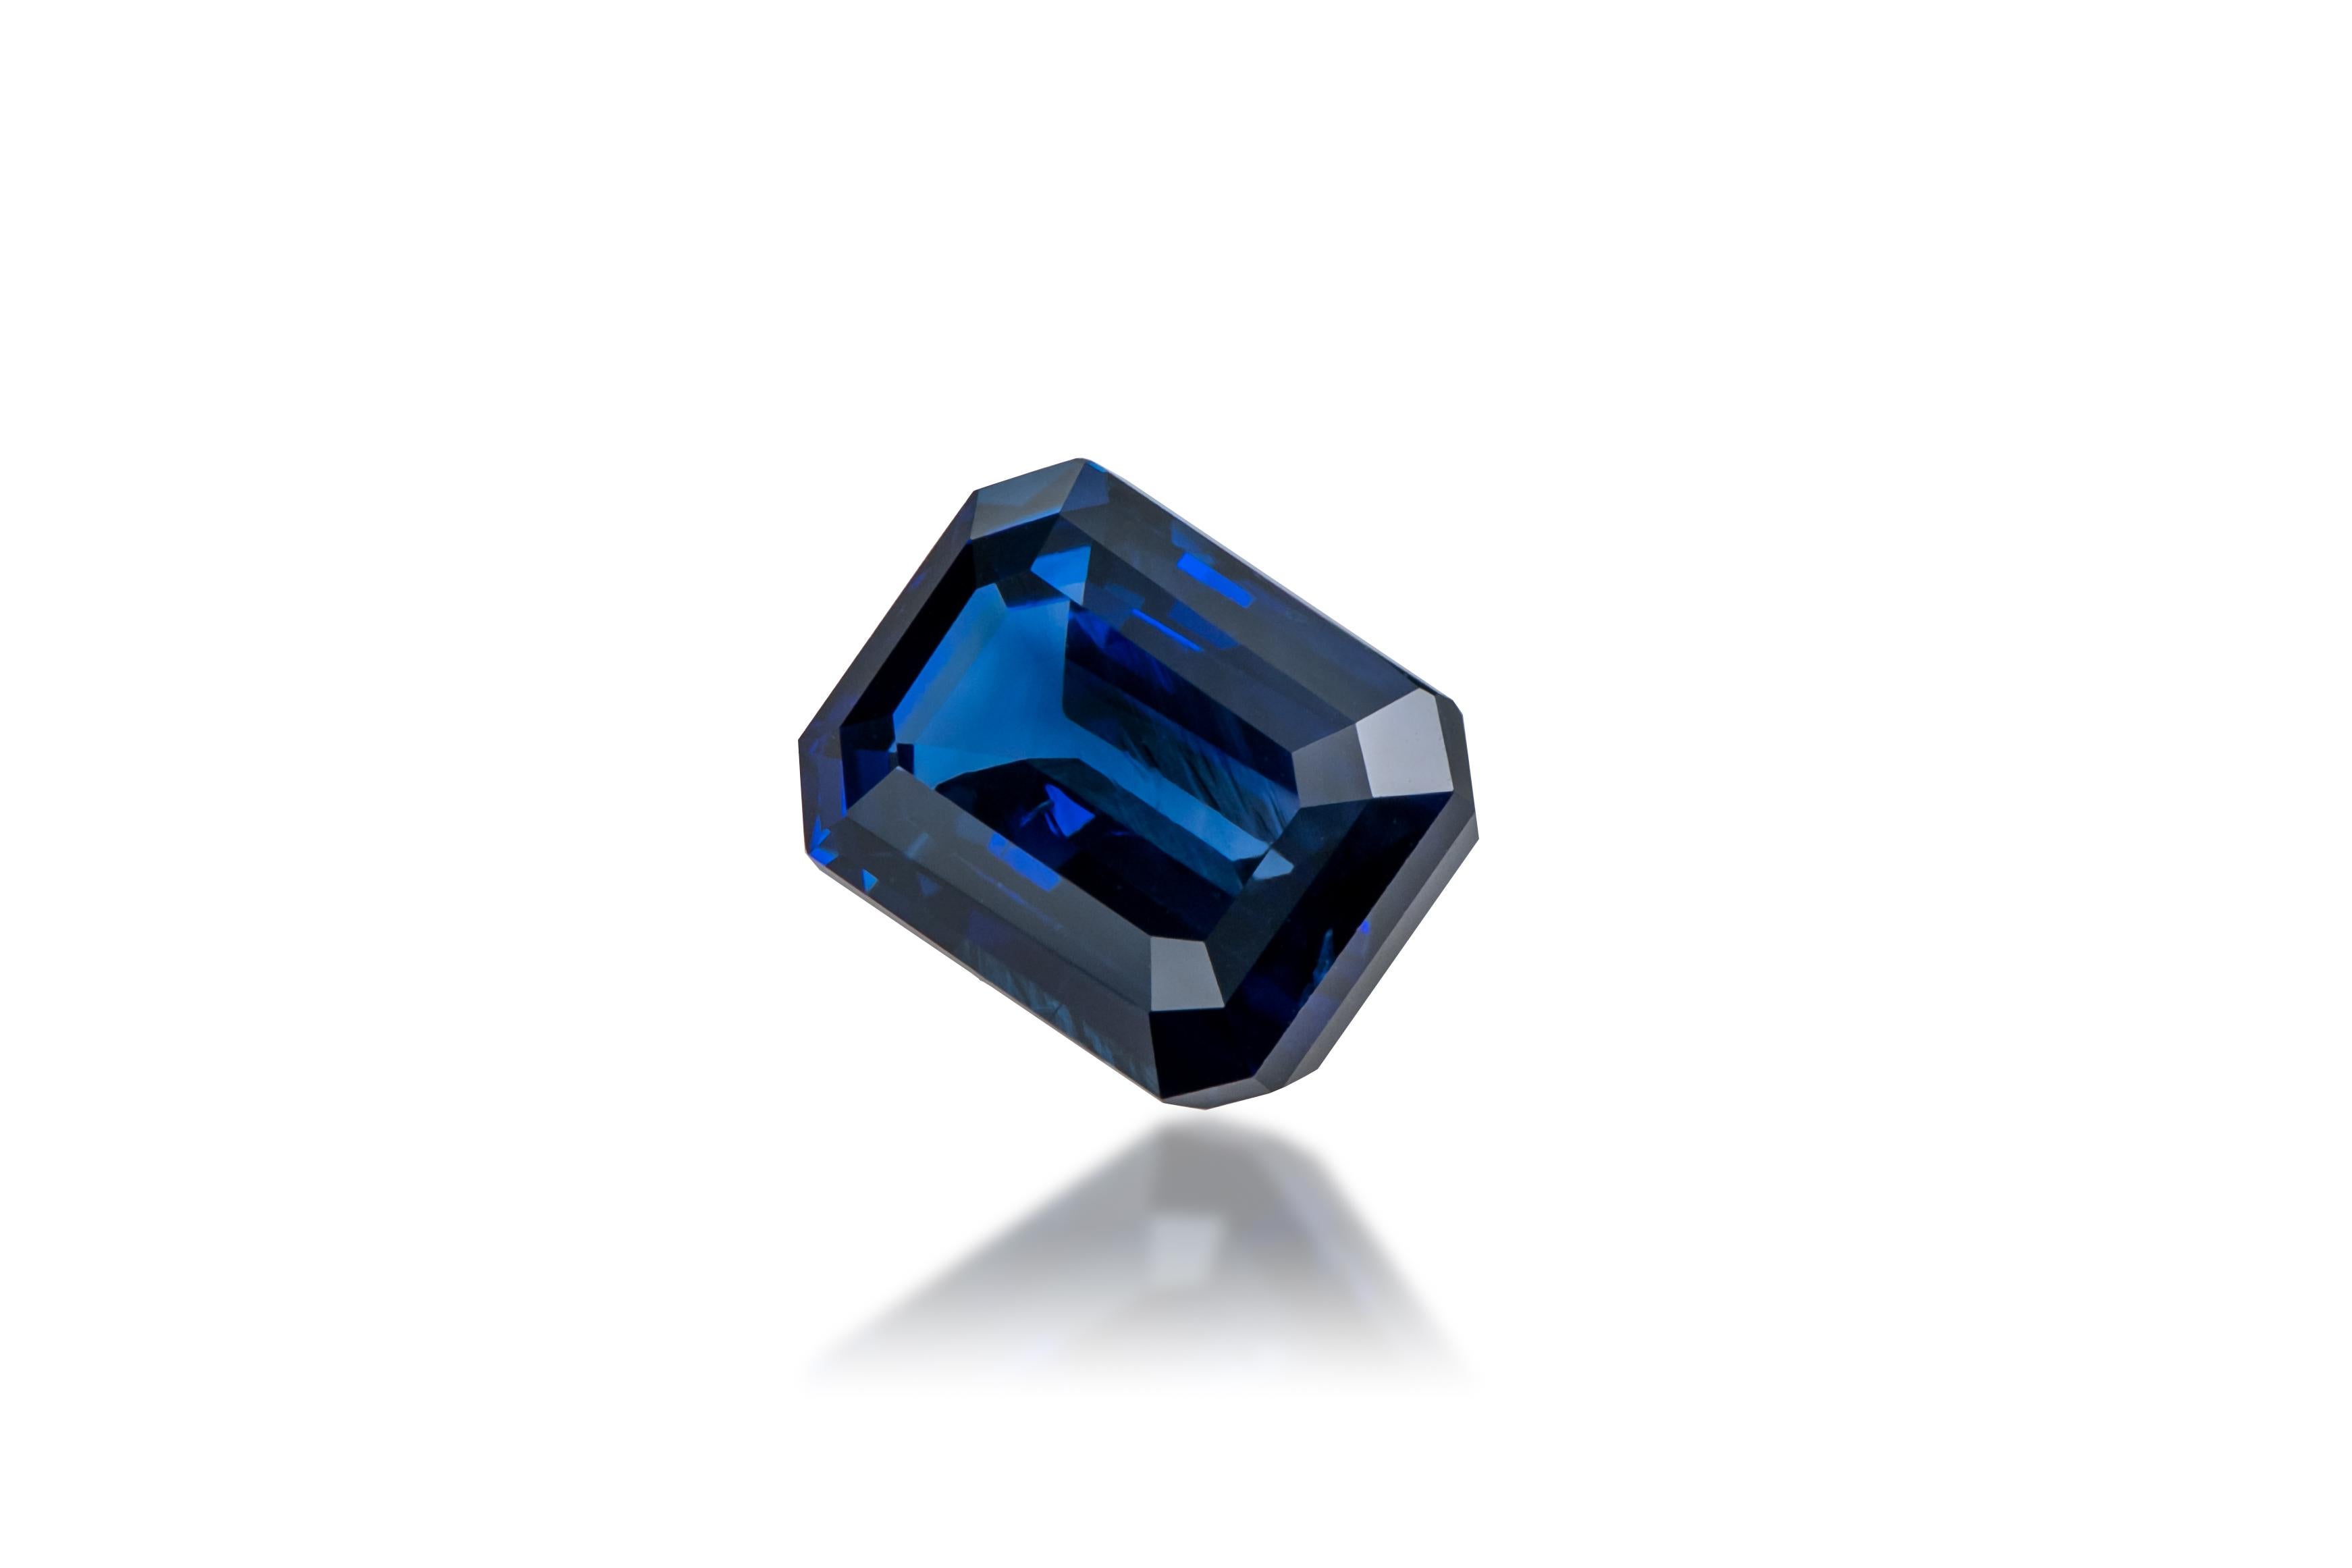 Sapphire: Vivid/Royal Blue Sapphire
Origin: Sri Lanka
Shape: Octagonal Cut
Carat Weight: 4.00 cts
Dimensions: 10.26 x 7.32 x 4.64 mm

This beautiful Vivid/Royal Sapphire has a beautiful blue color and is unheated.
It is clean and nicely faceted and